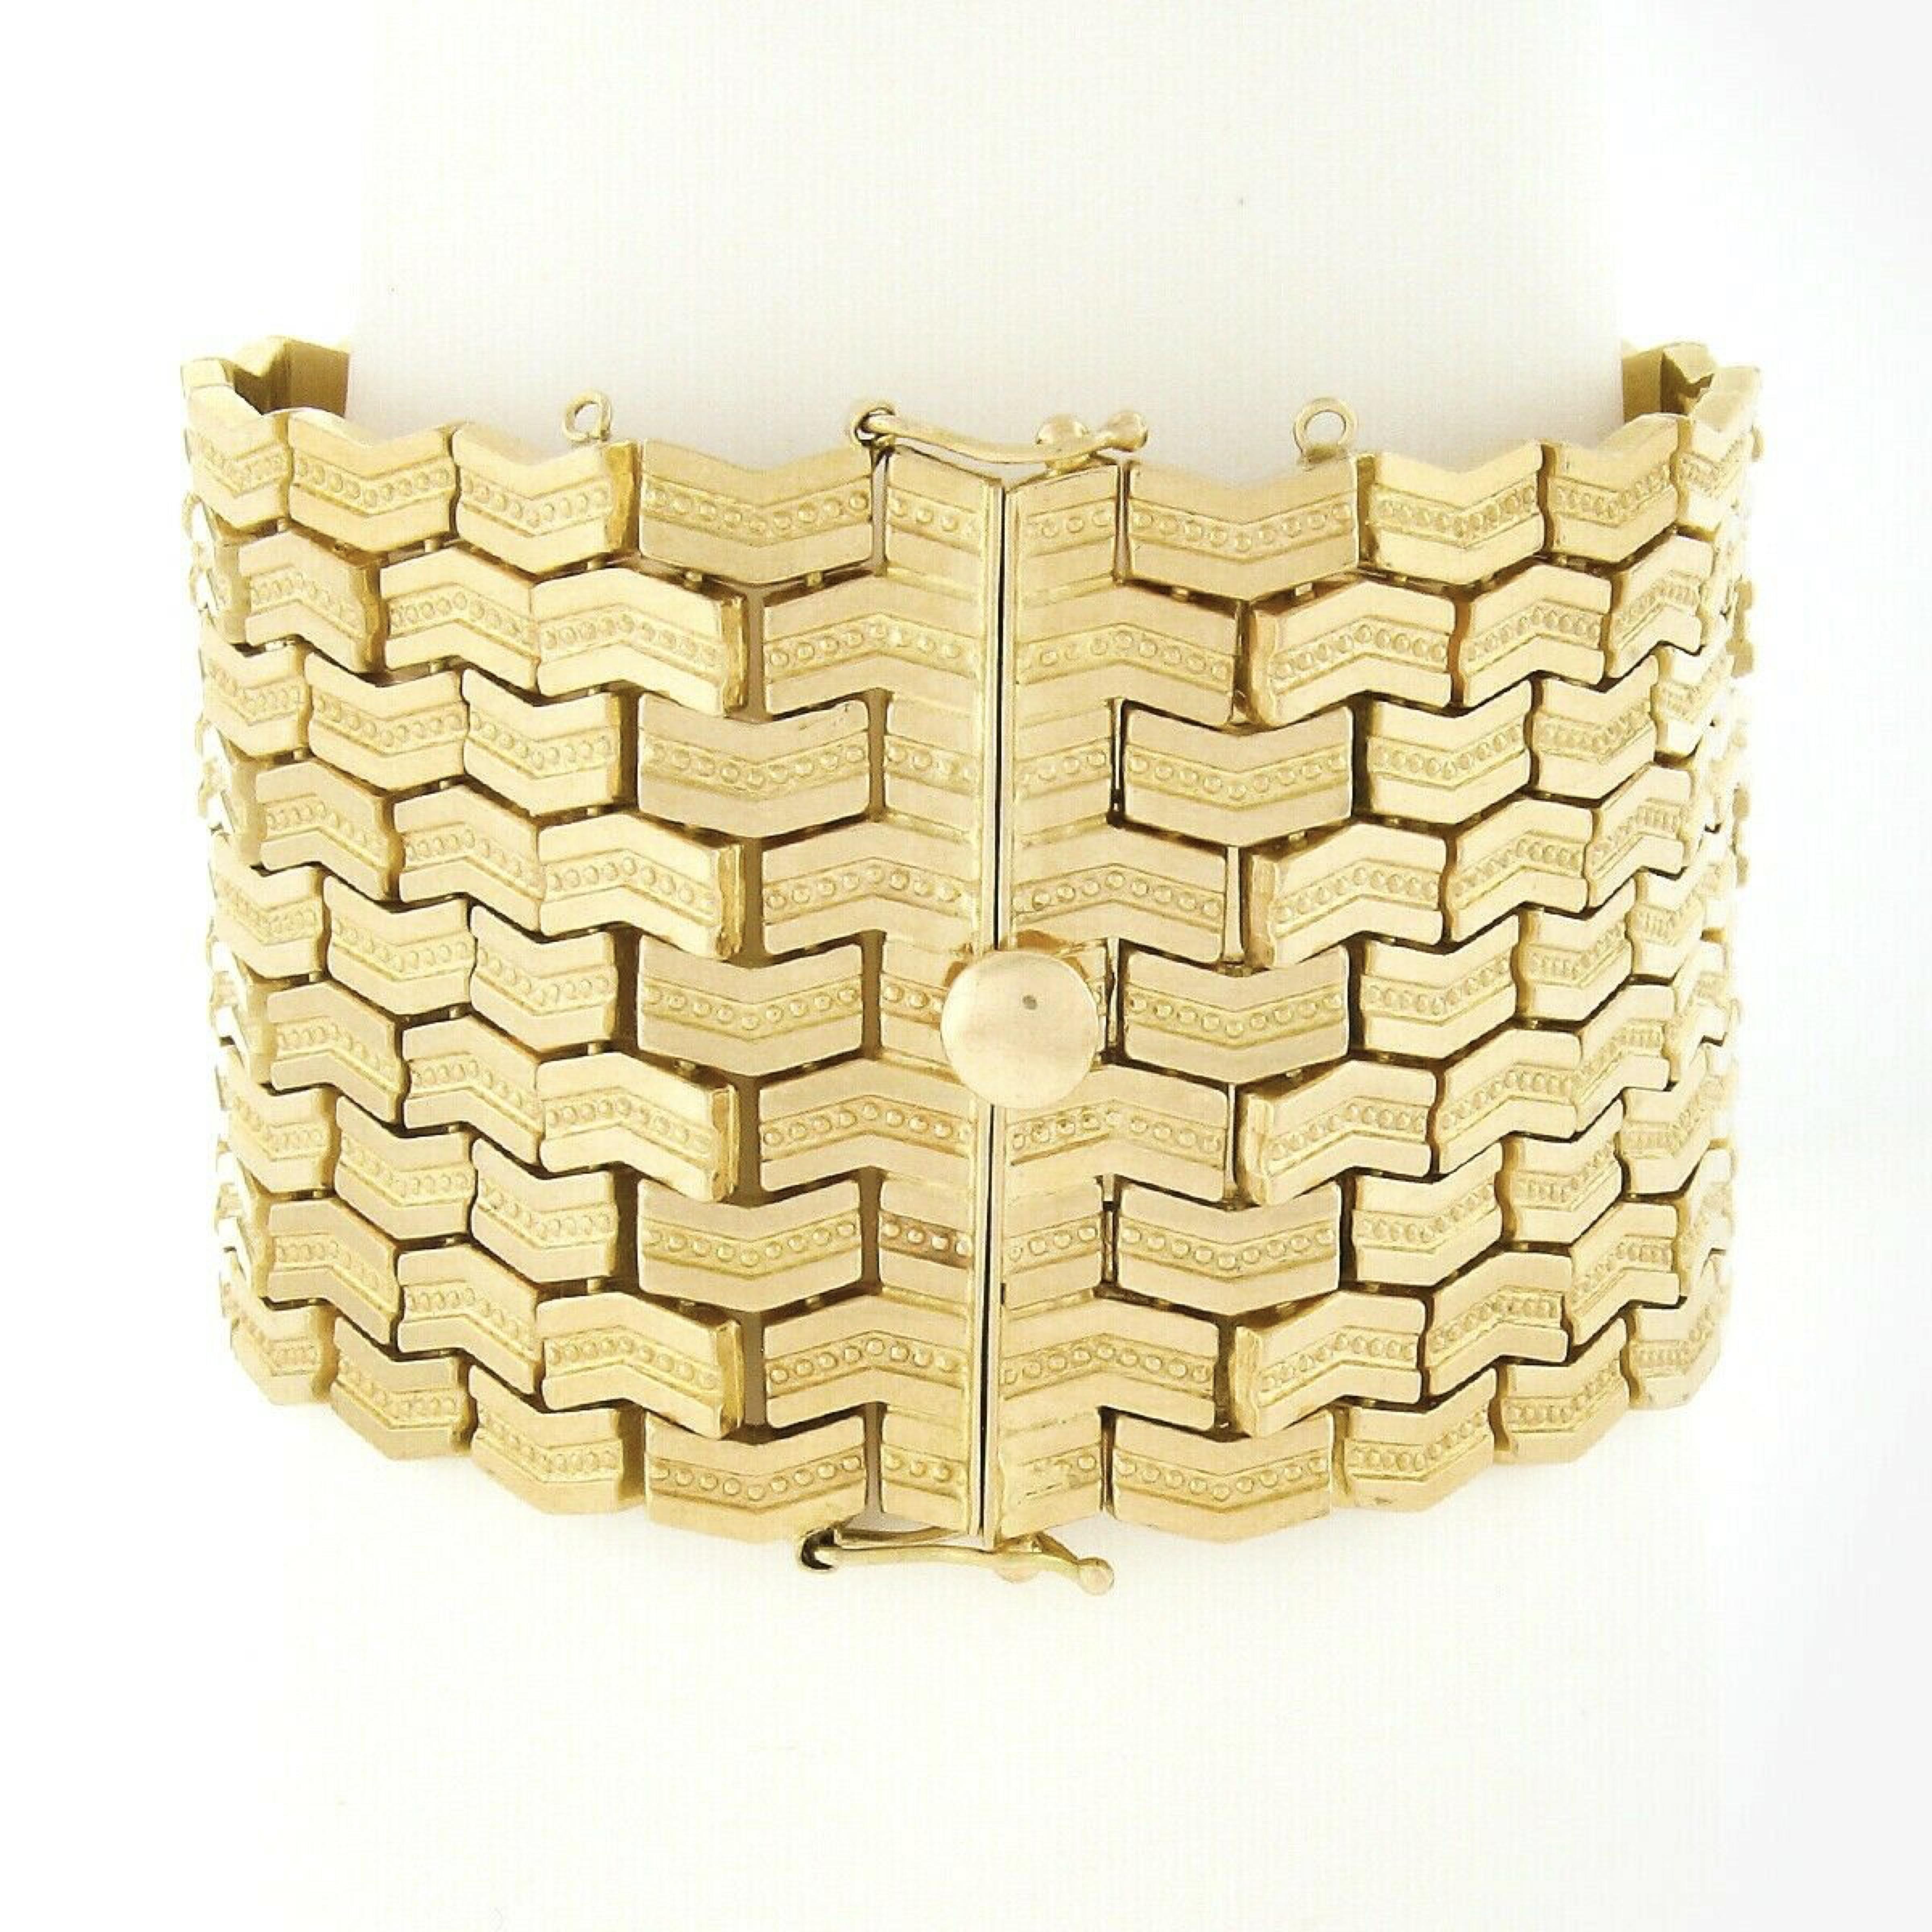 This magnificent vintage strap bracelet was crafted from solid 18k yellow gold and features a wide design constructed from 9 rows of geometric shaped links neatly set throughout. Each link has a nice high-polished finish with elegant bead work